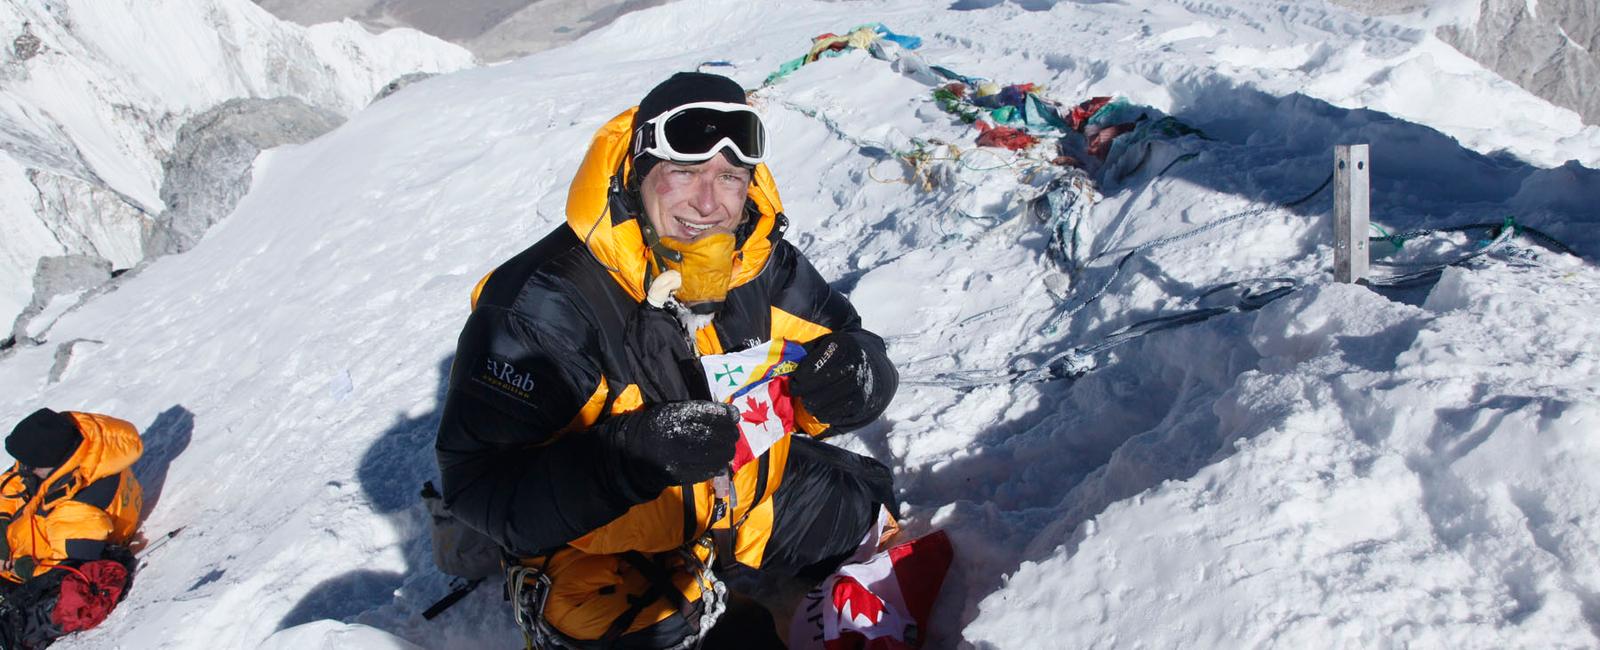 There are over 200 dead bodies on top of mount everest because retrieving them is such a risk they serve as markers for other hikers